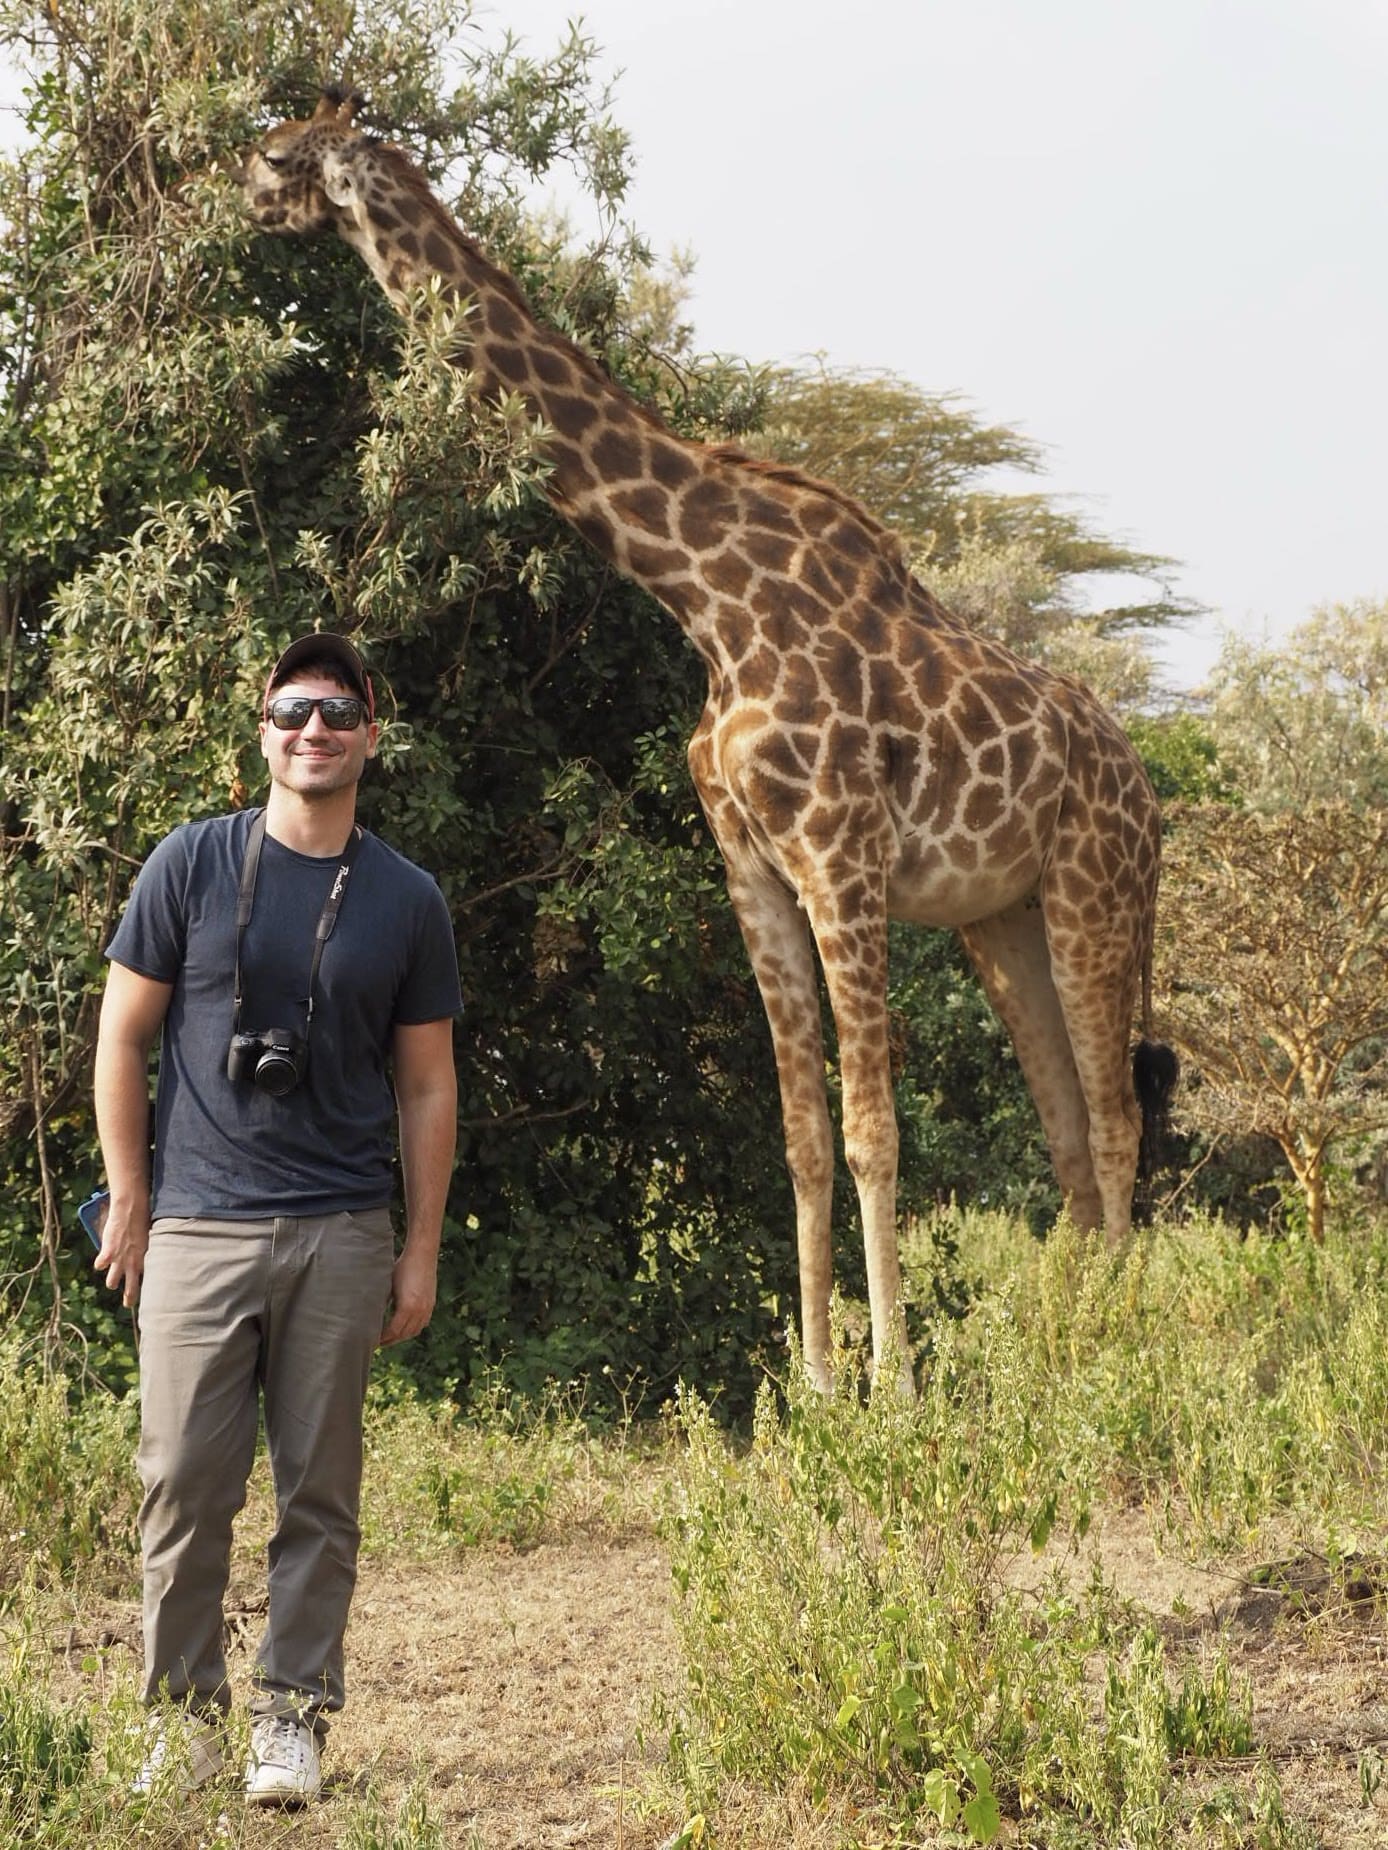 A gay traveller poses in front of a giraffe on Crescent Island.